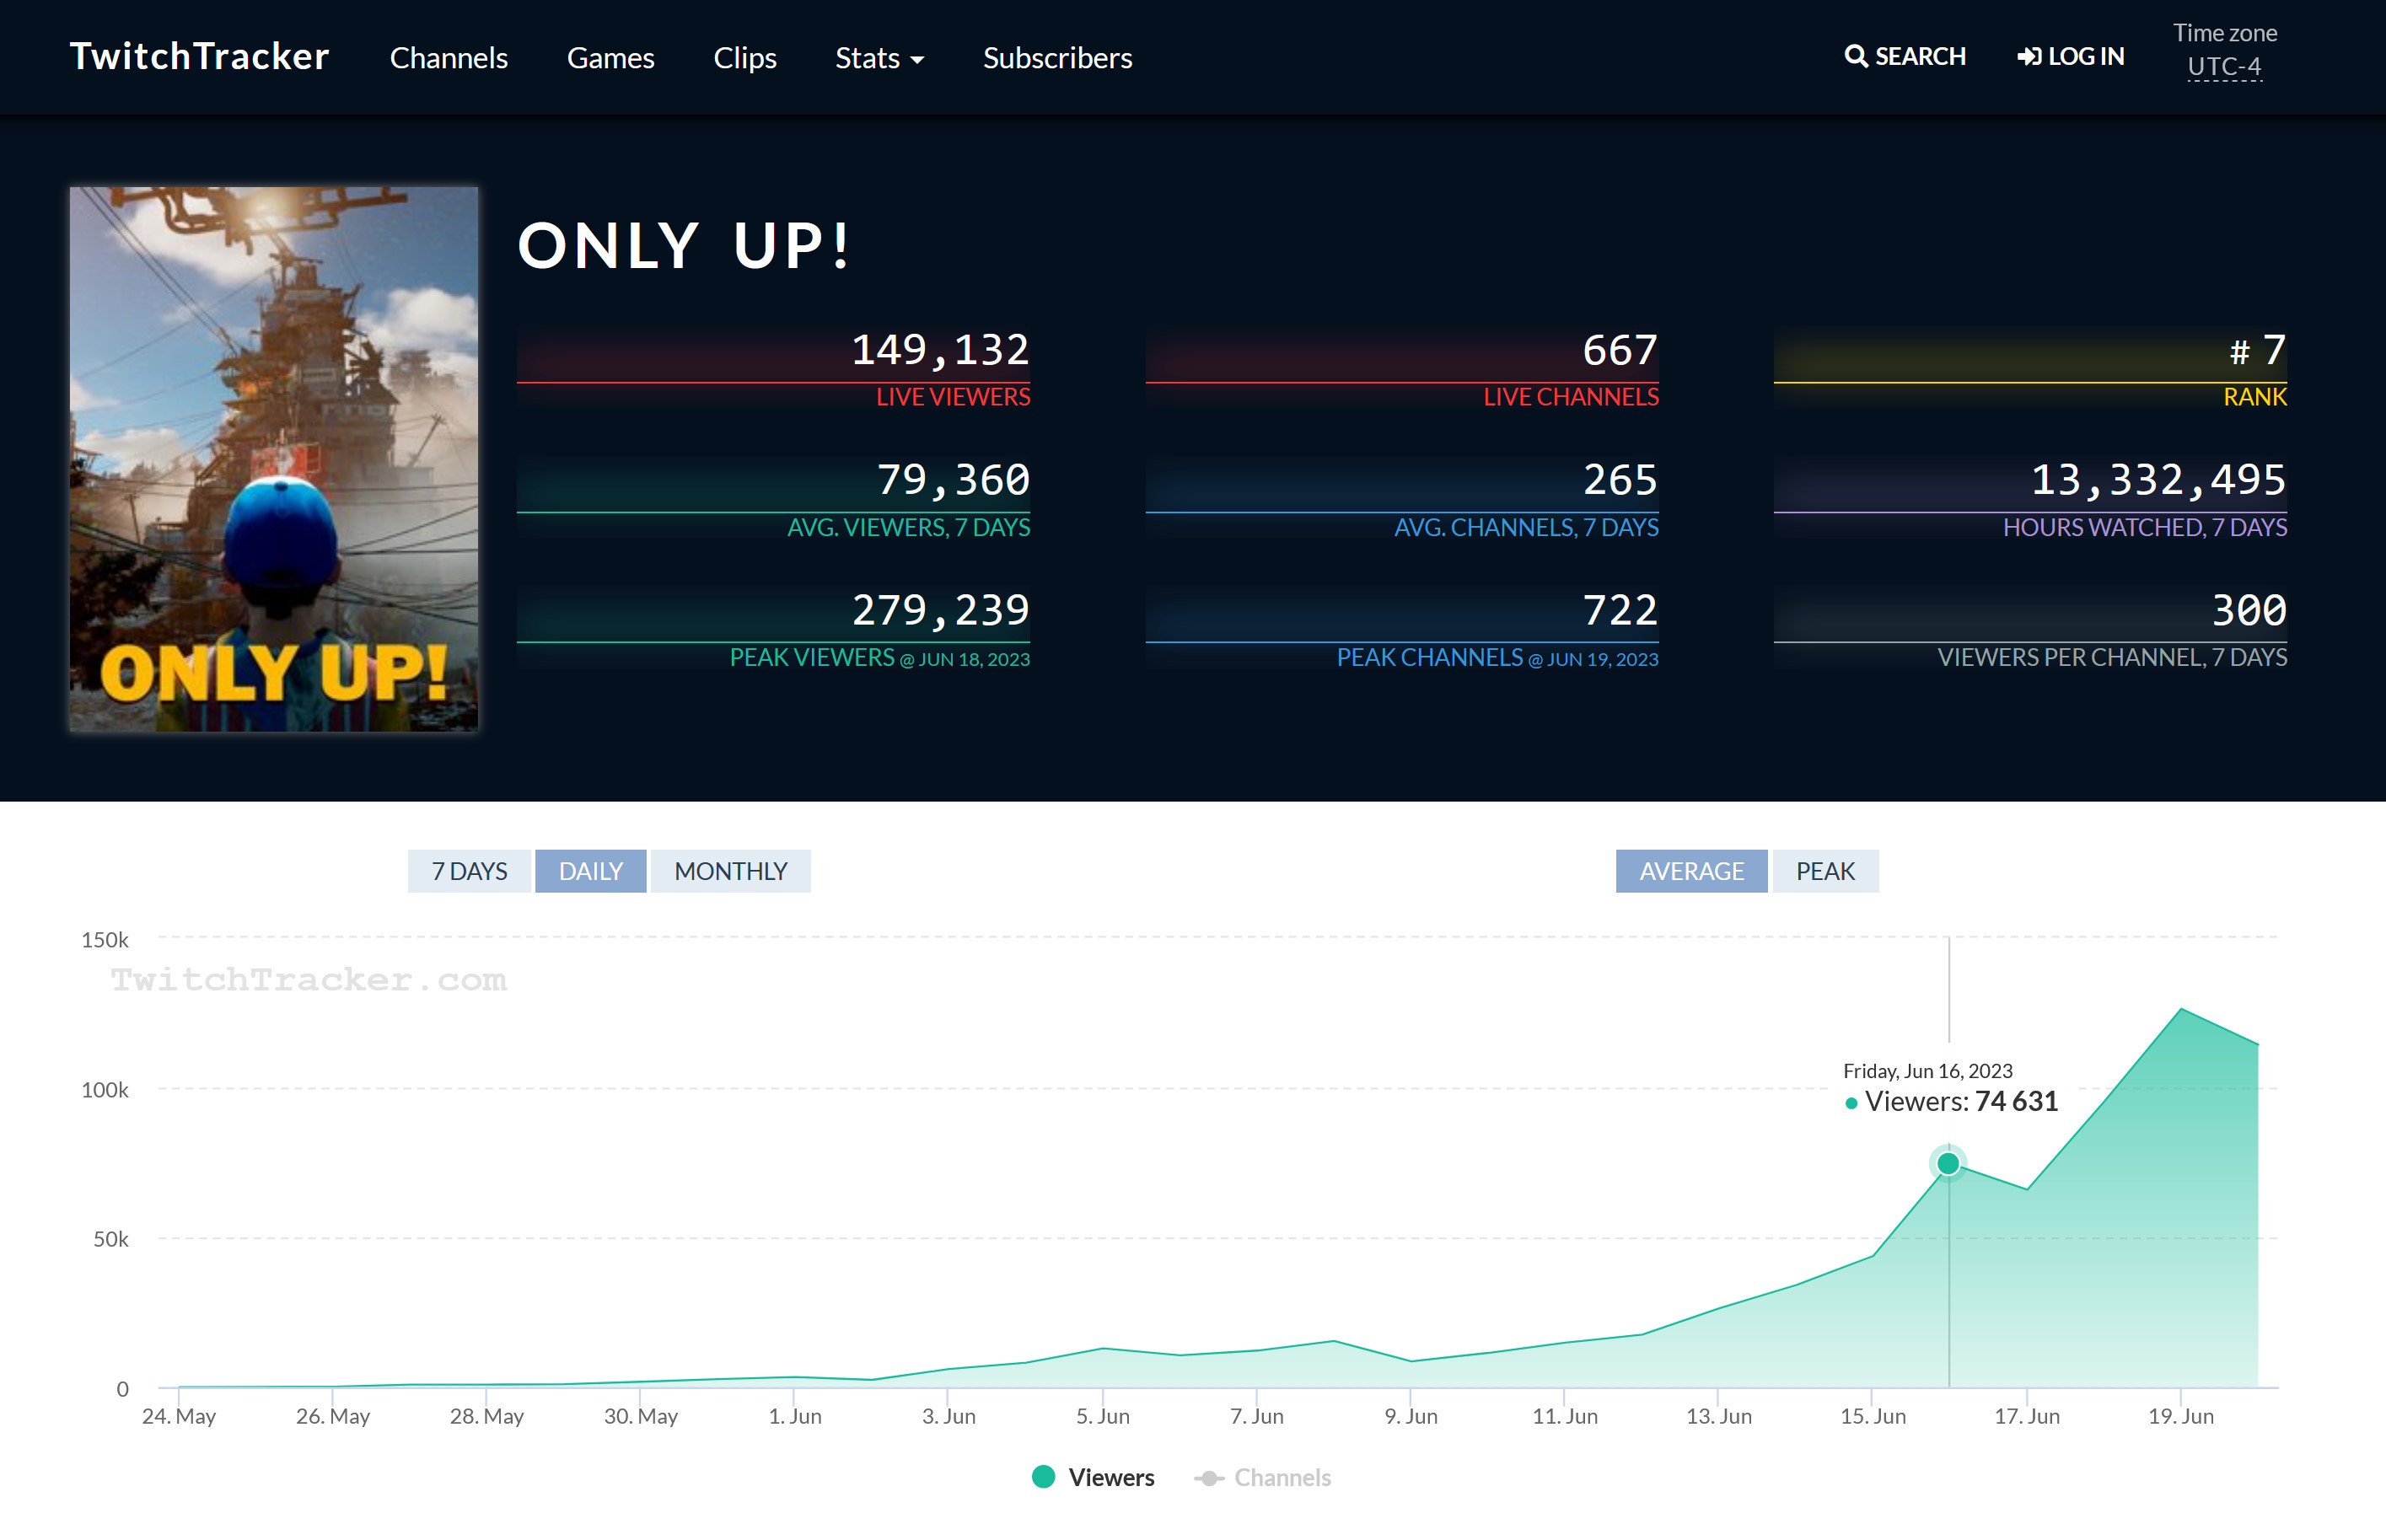 Only Up!  on Twitch Tracker